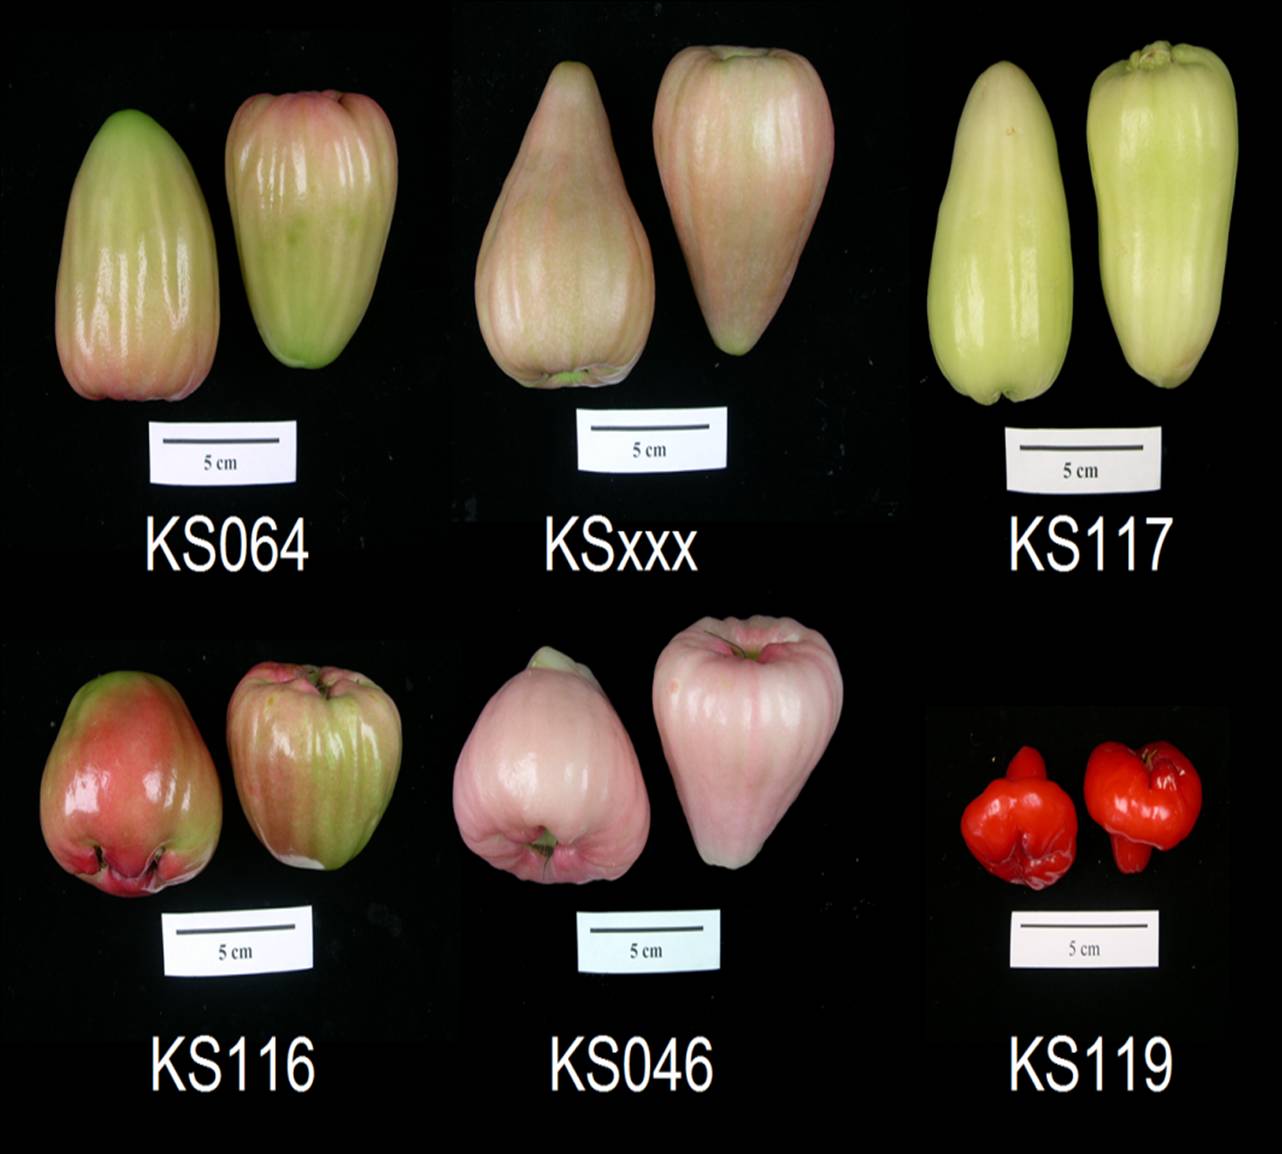 New_lines_of_wax_apples_with_a_wide_variety_of_bright_colors KS064 - KS119